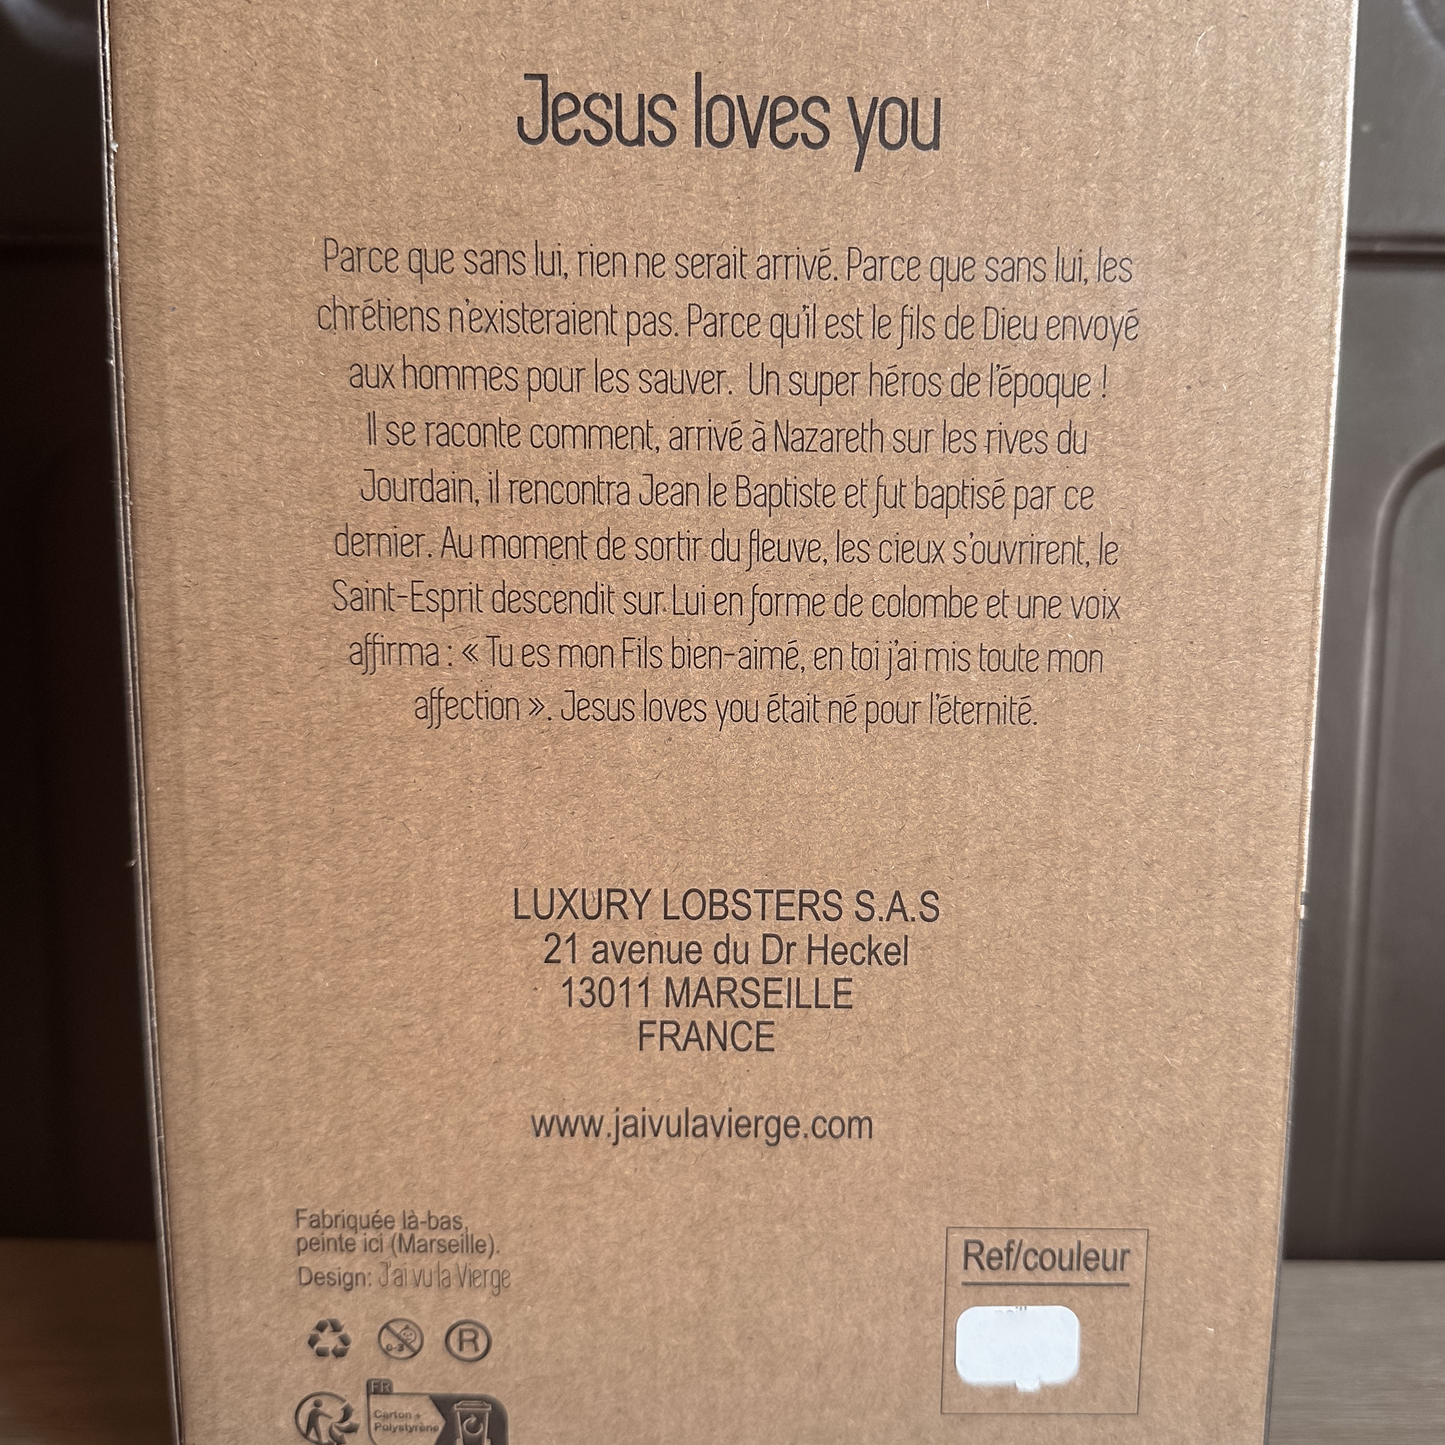 Jesus loves you statuette - timeless colors